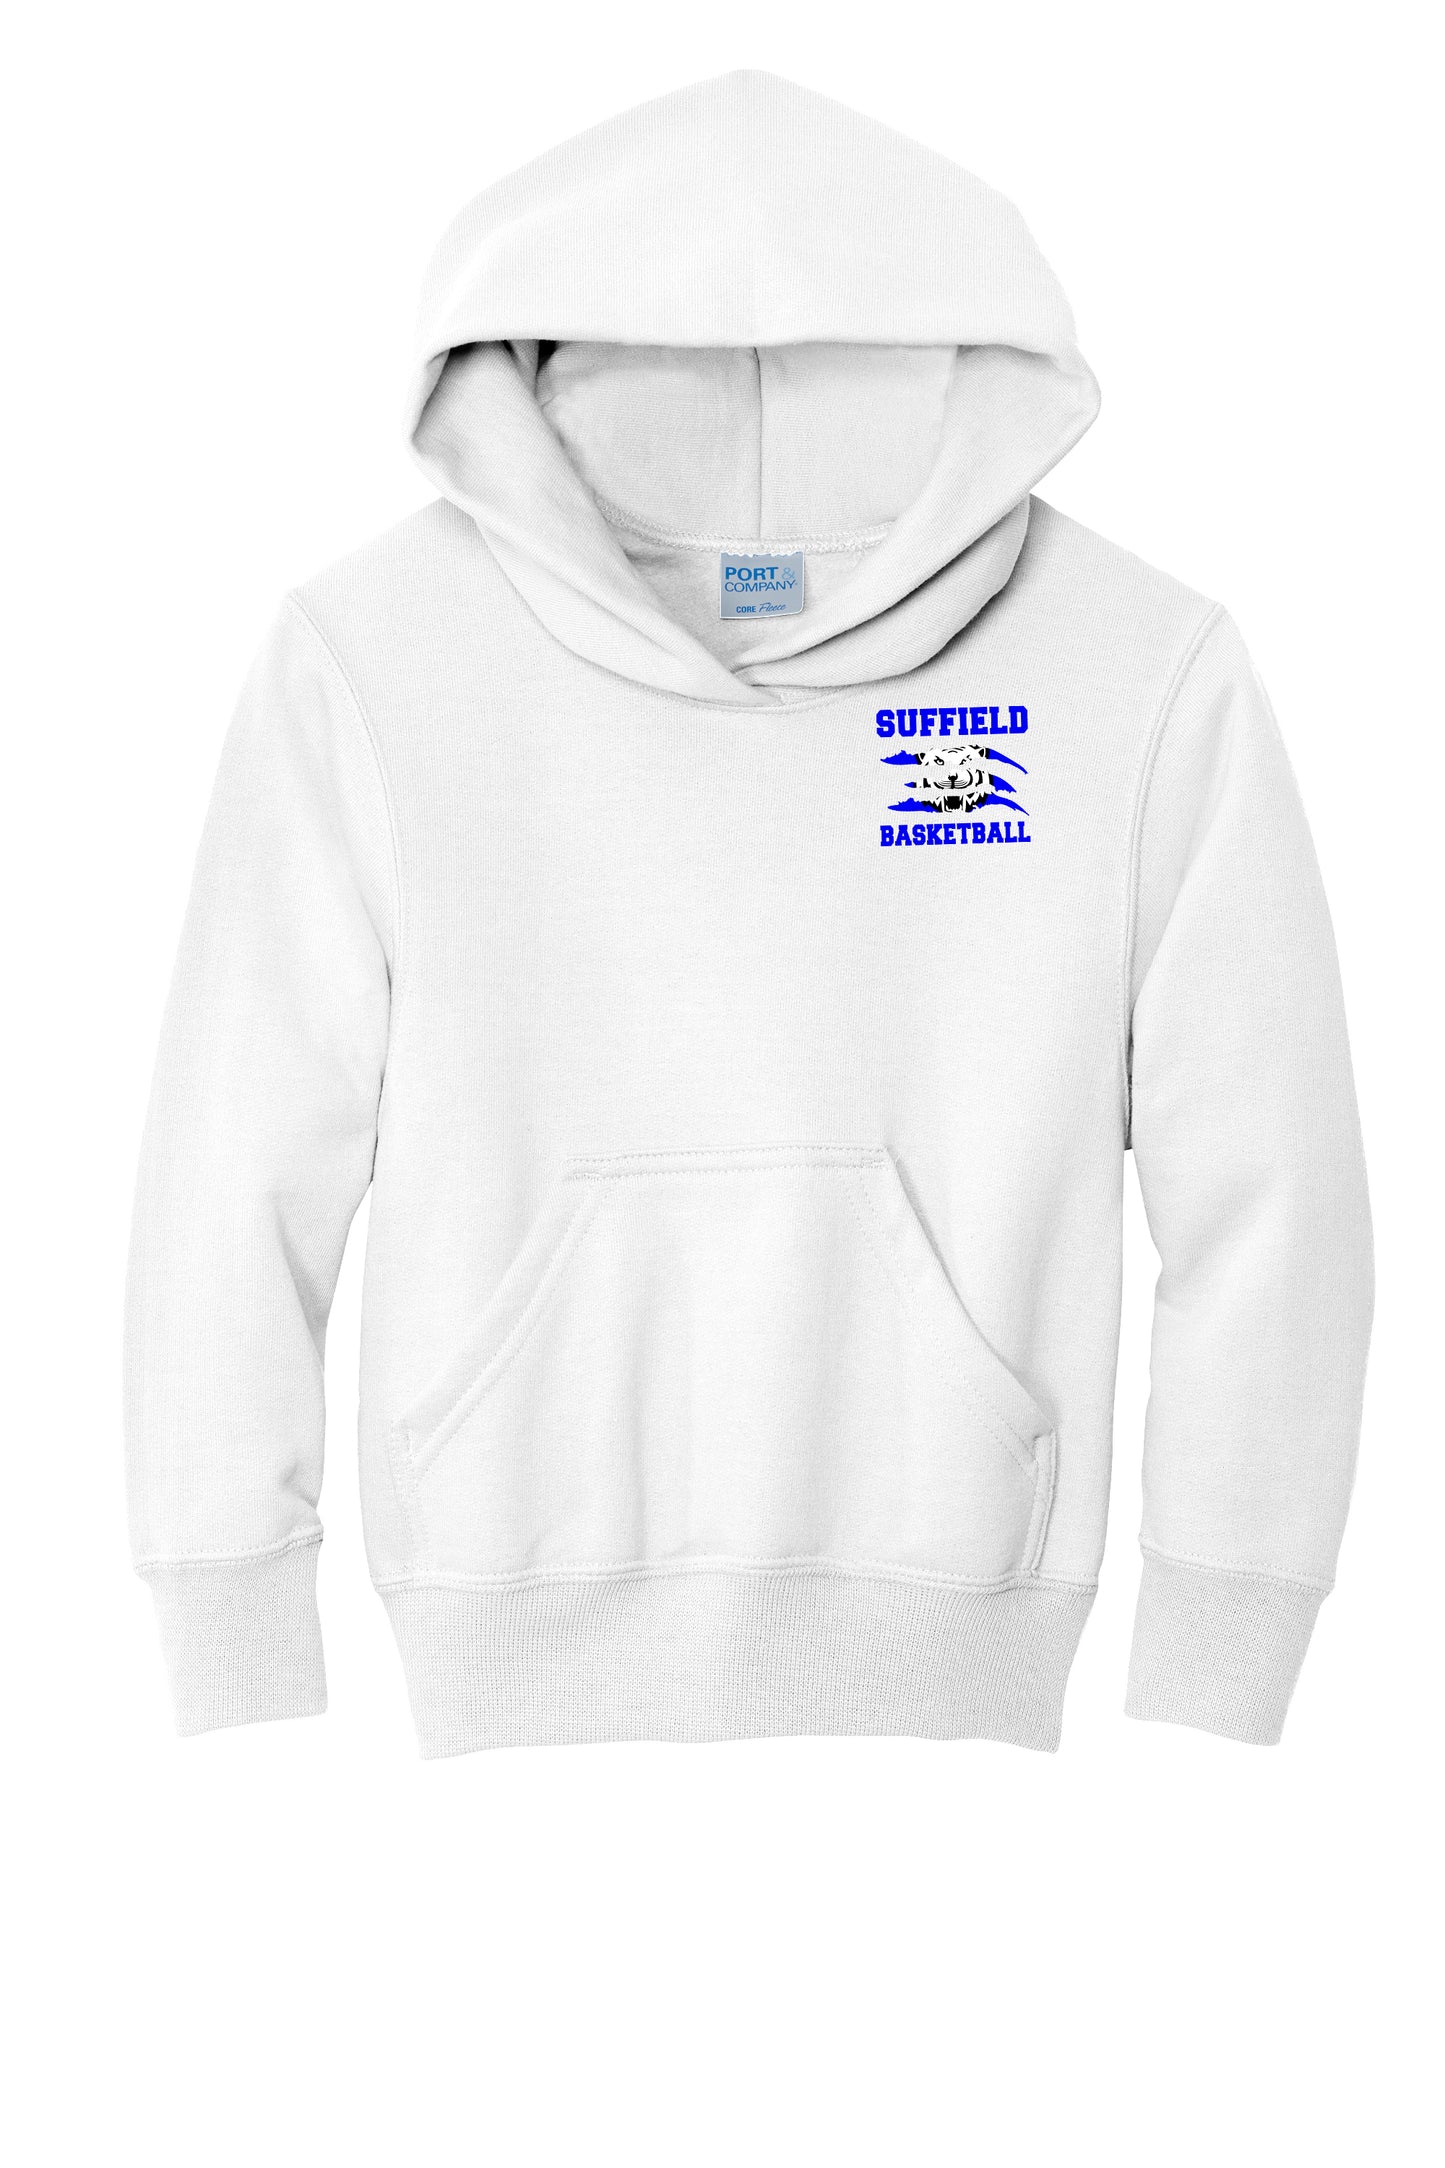 Suffield TB - Youth Fleece "Scratch" - PC90YH White